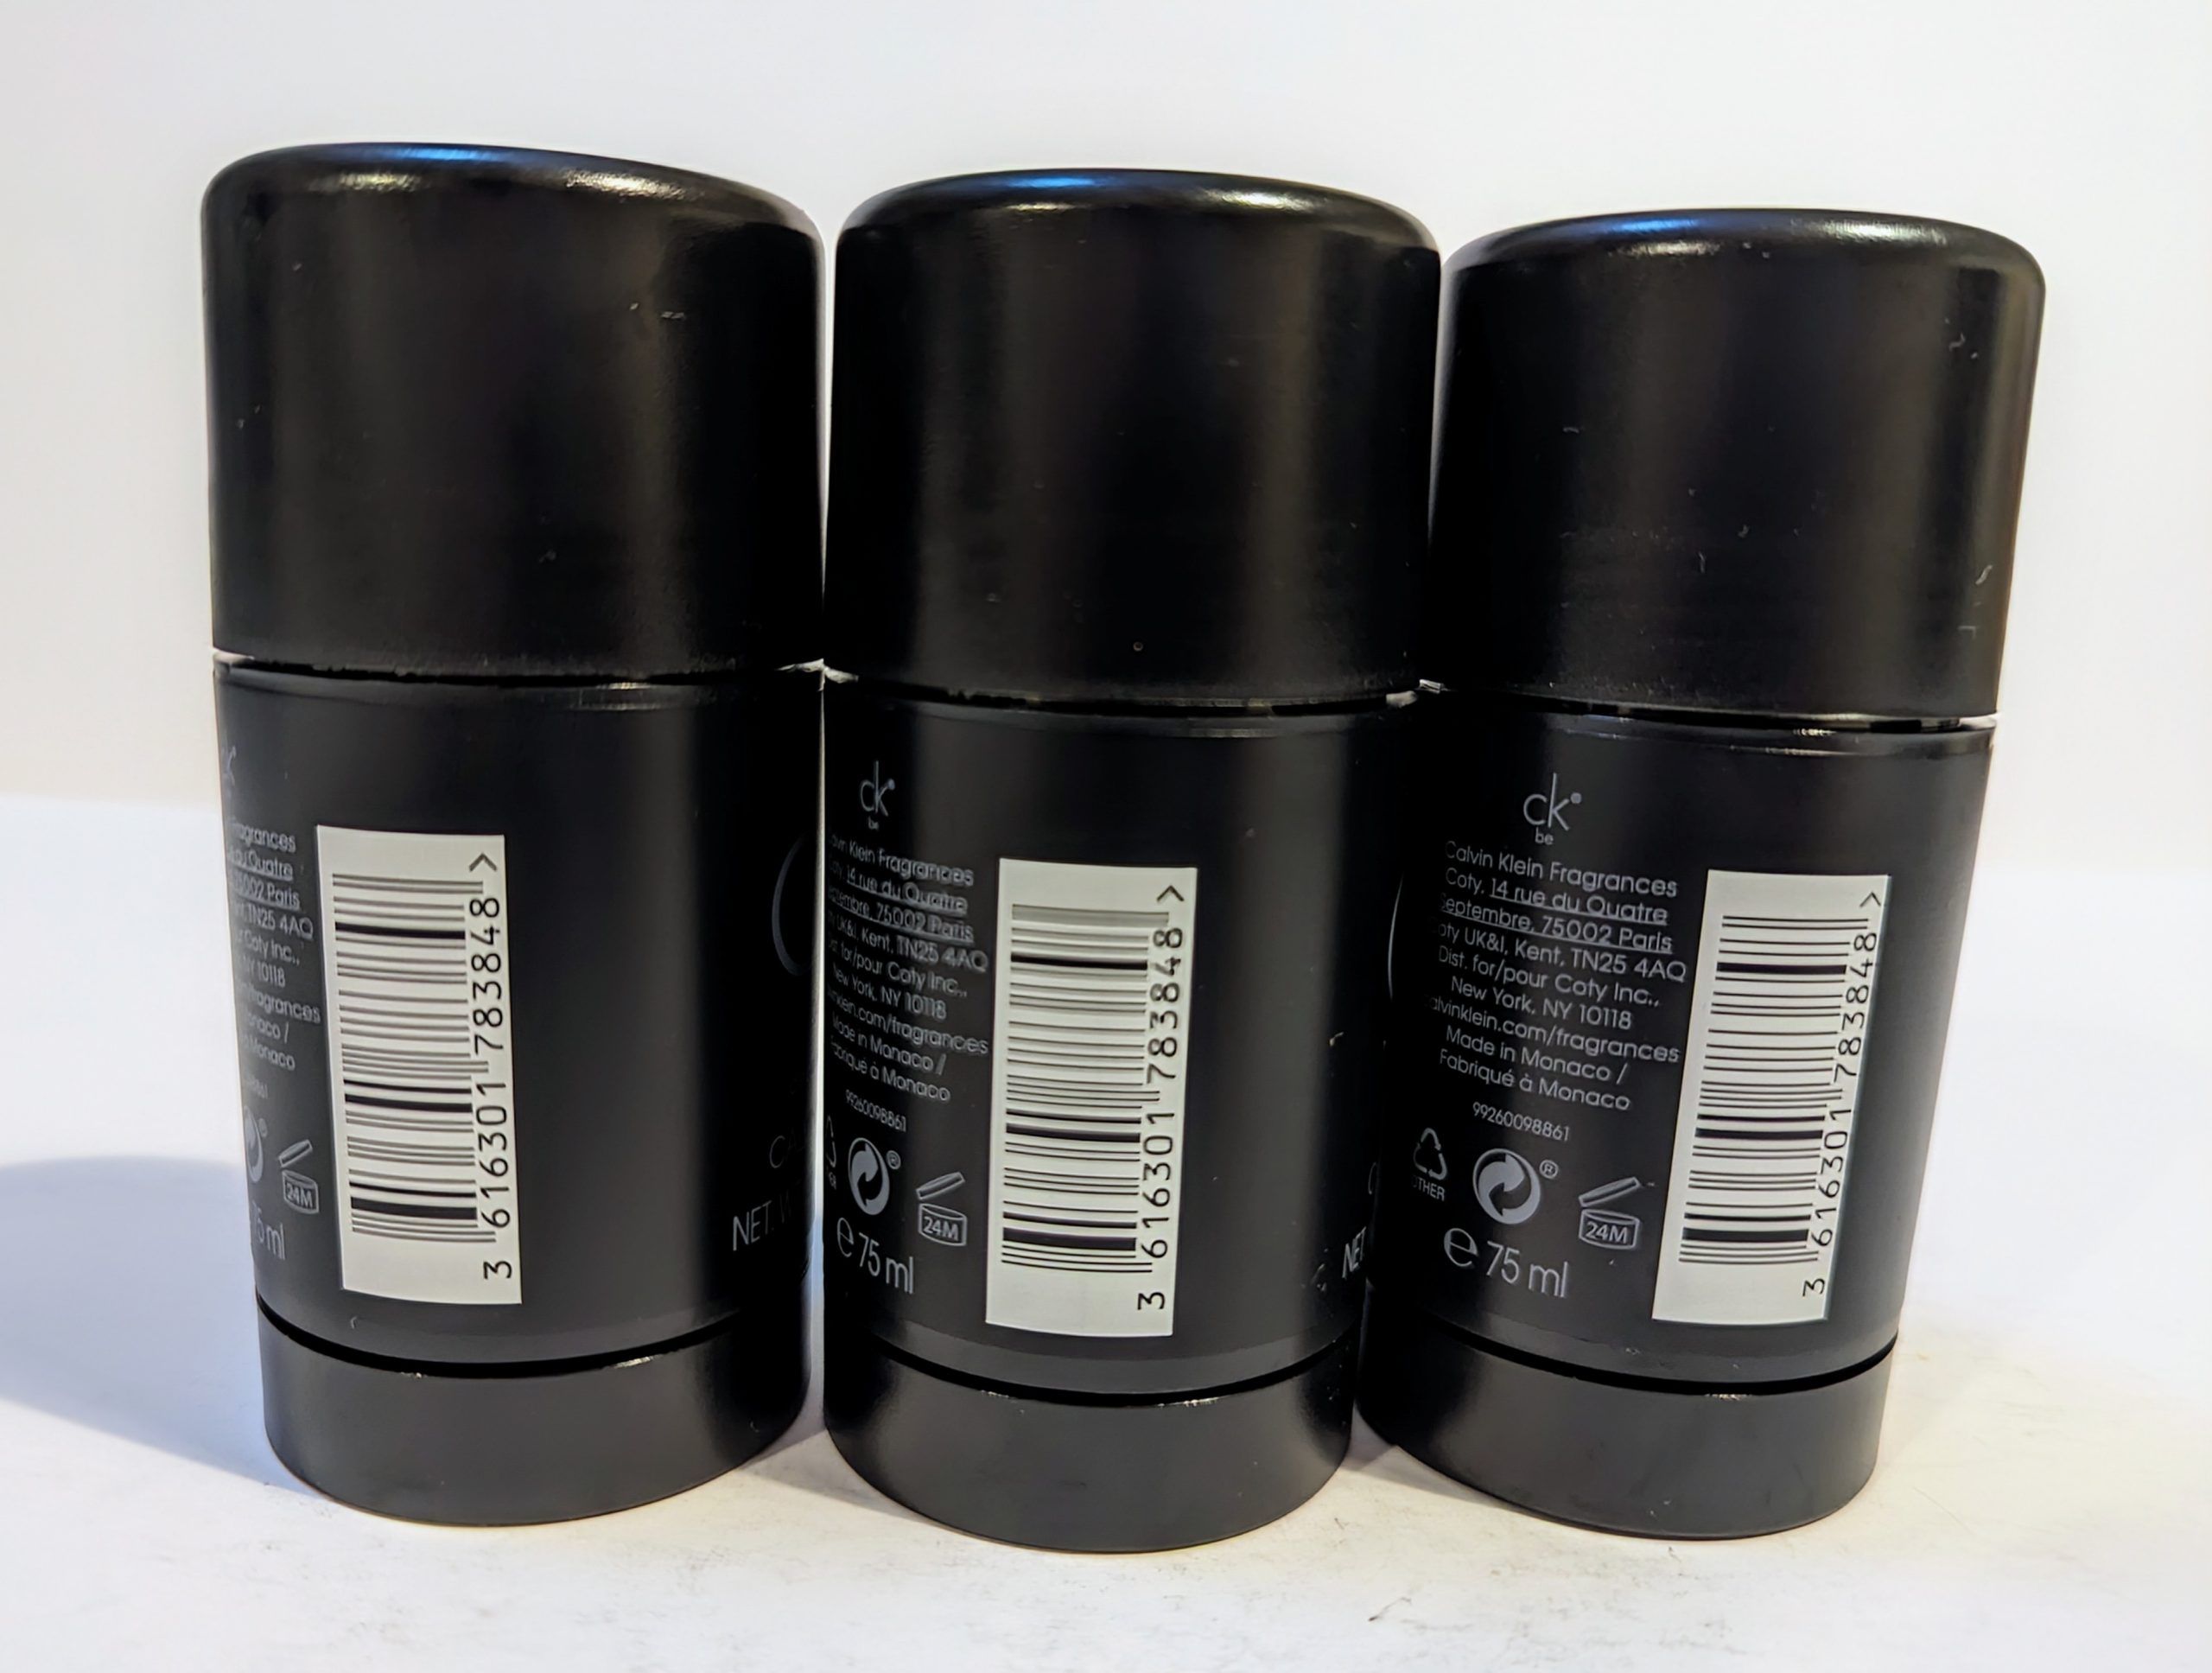 Three black deodorant sticks are arranged in a row, with barcodes and product information visible on the back labels.